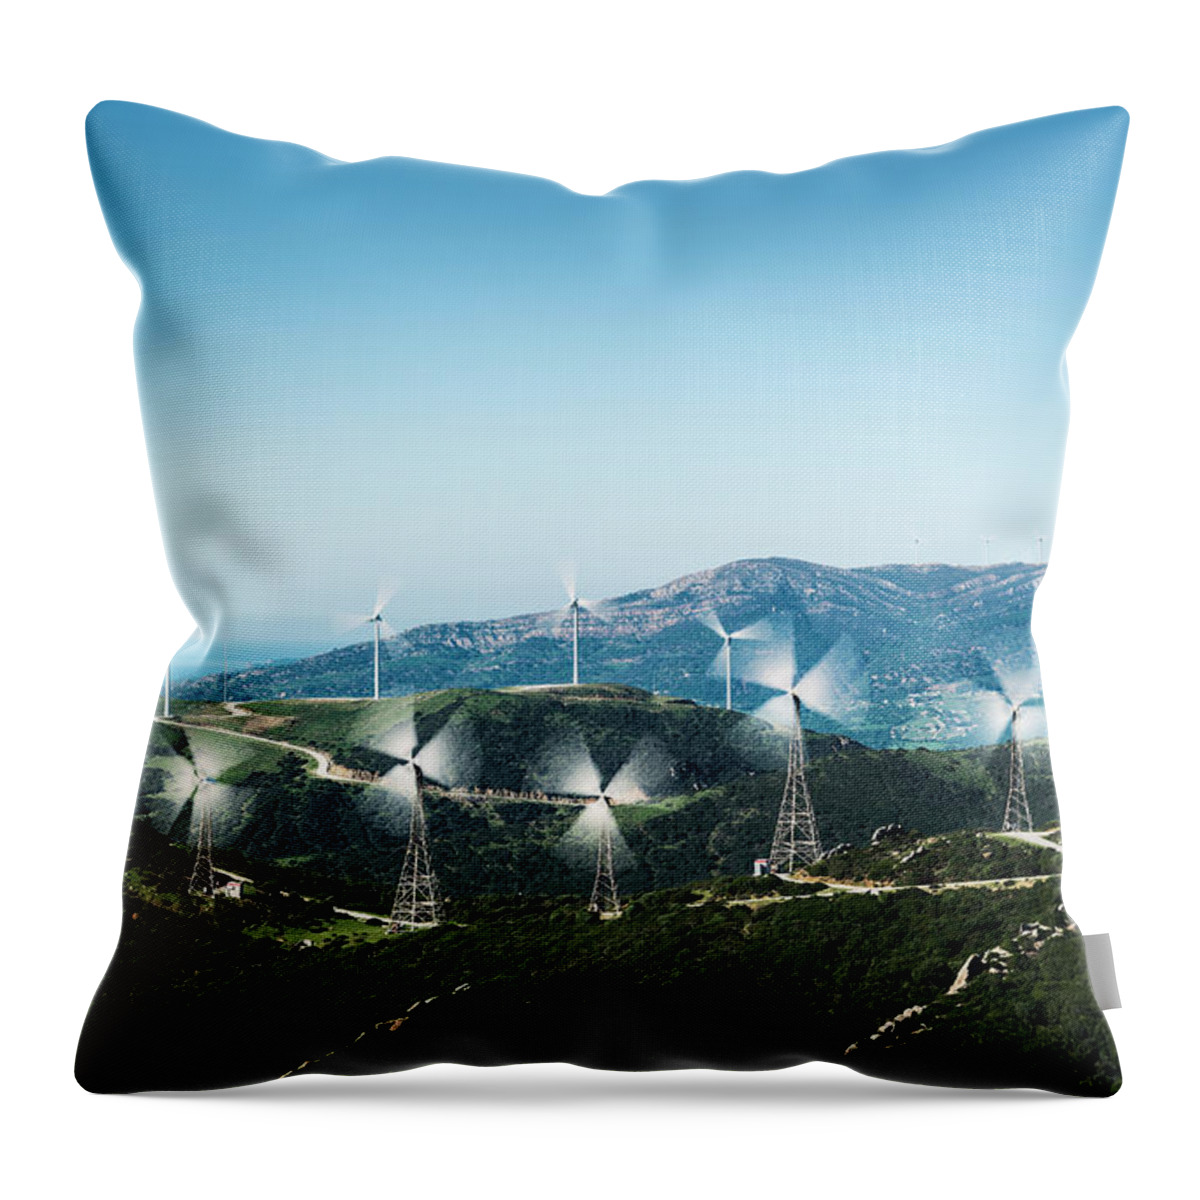 Environmental Conservation Throw Pillow featuring the photograph Wind Turbines On A Hill by Ben Welsh / Design Pics